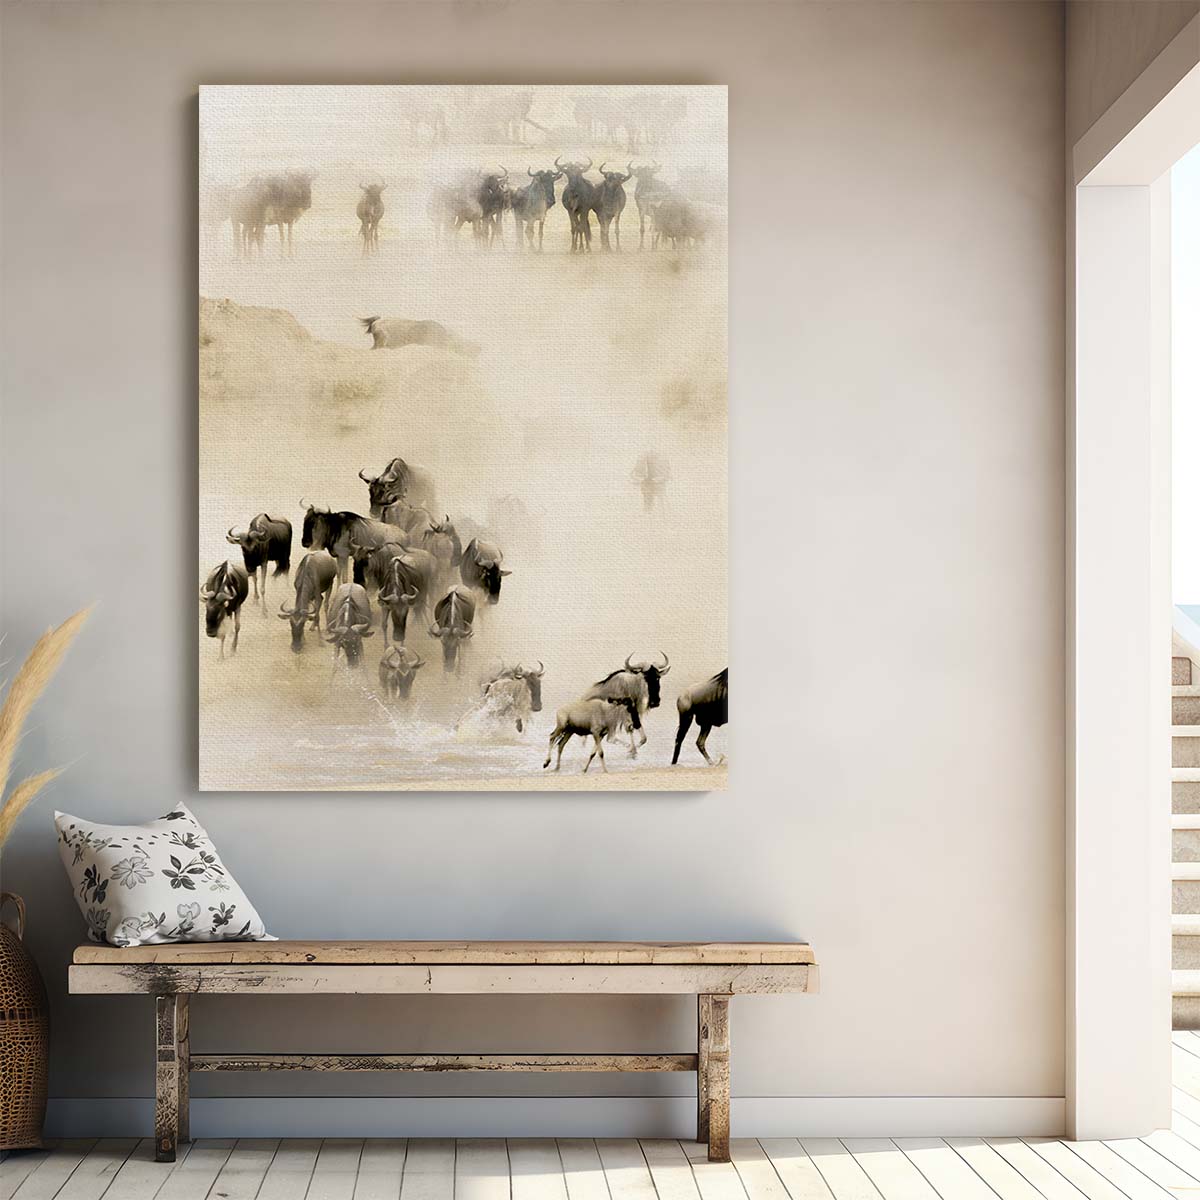 Serengeti Wildebeest Migration Photography, Sepia-toned African Wildlife Art by Luxuriance Designs, made in USA